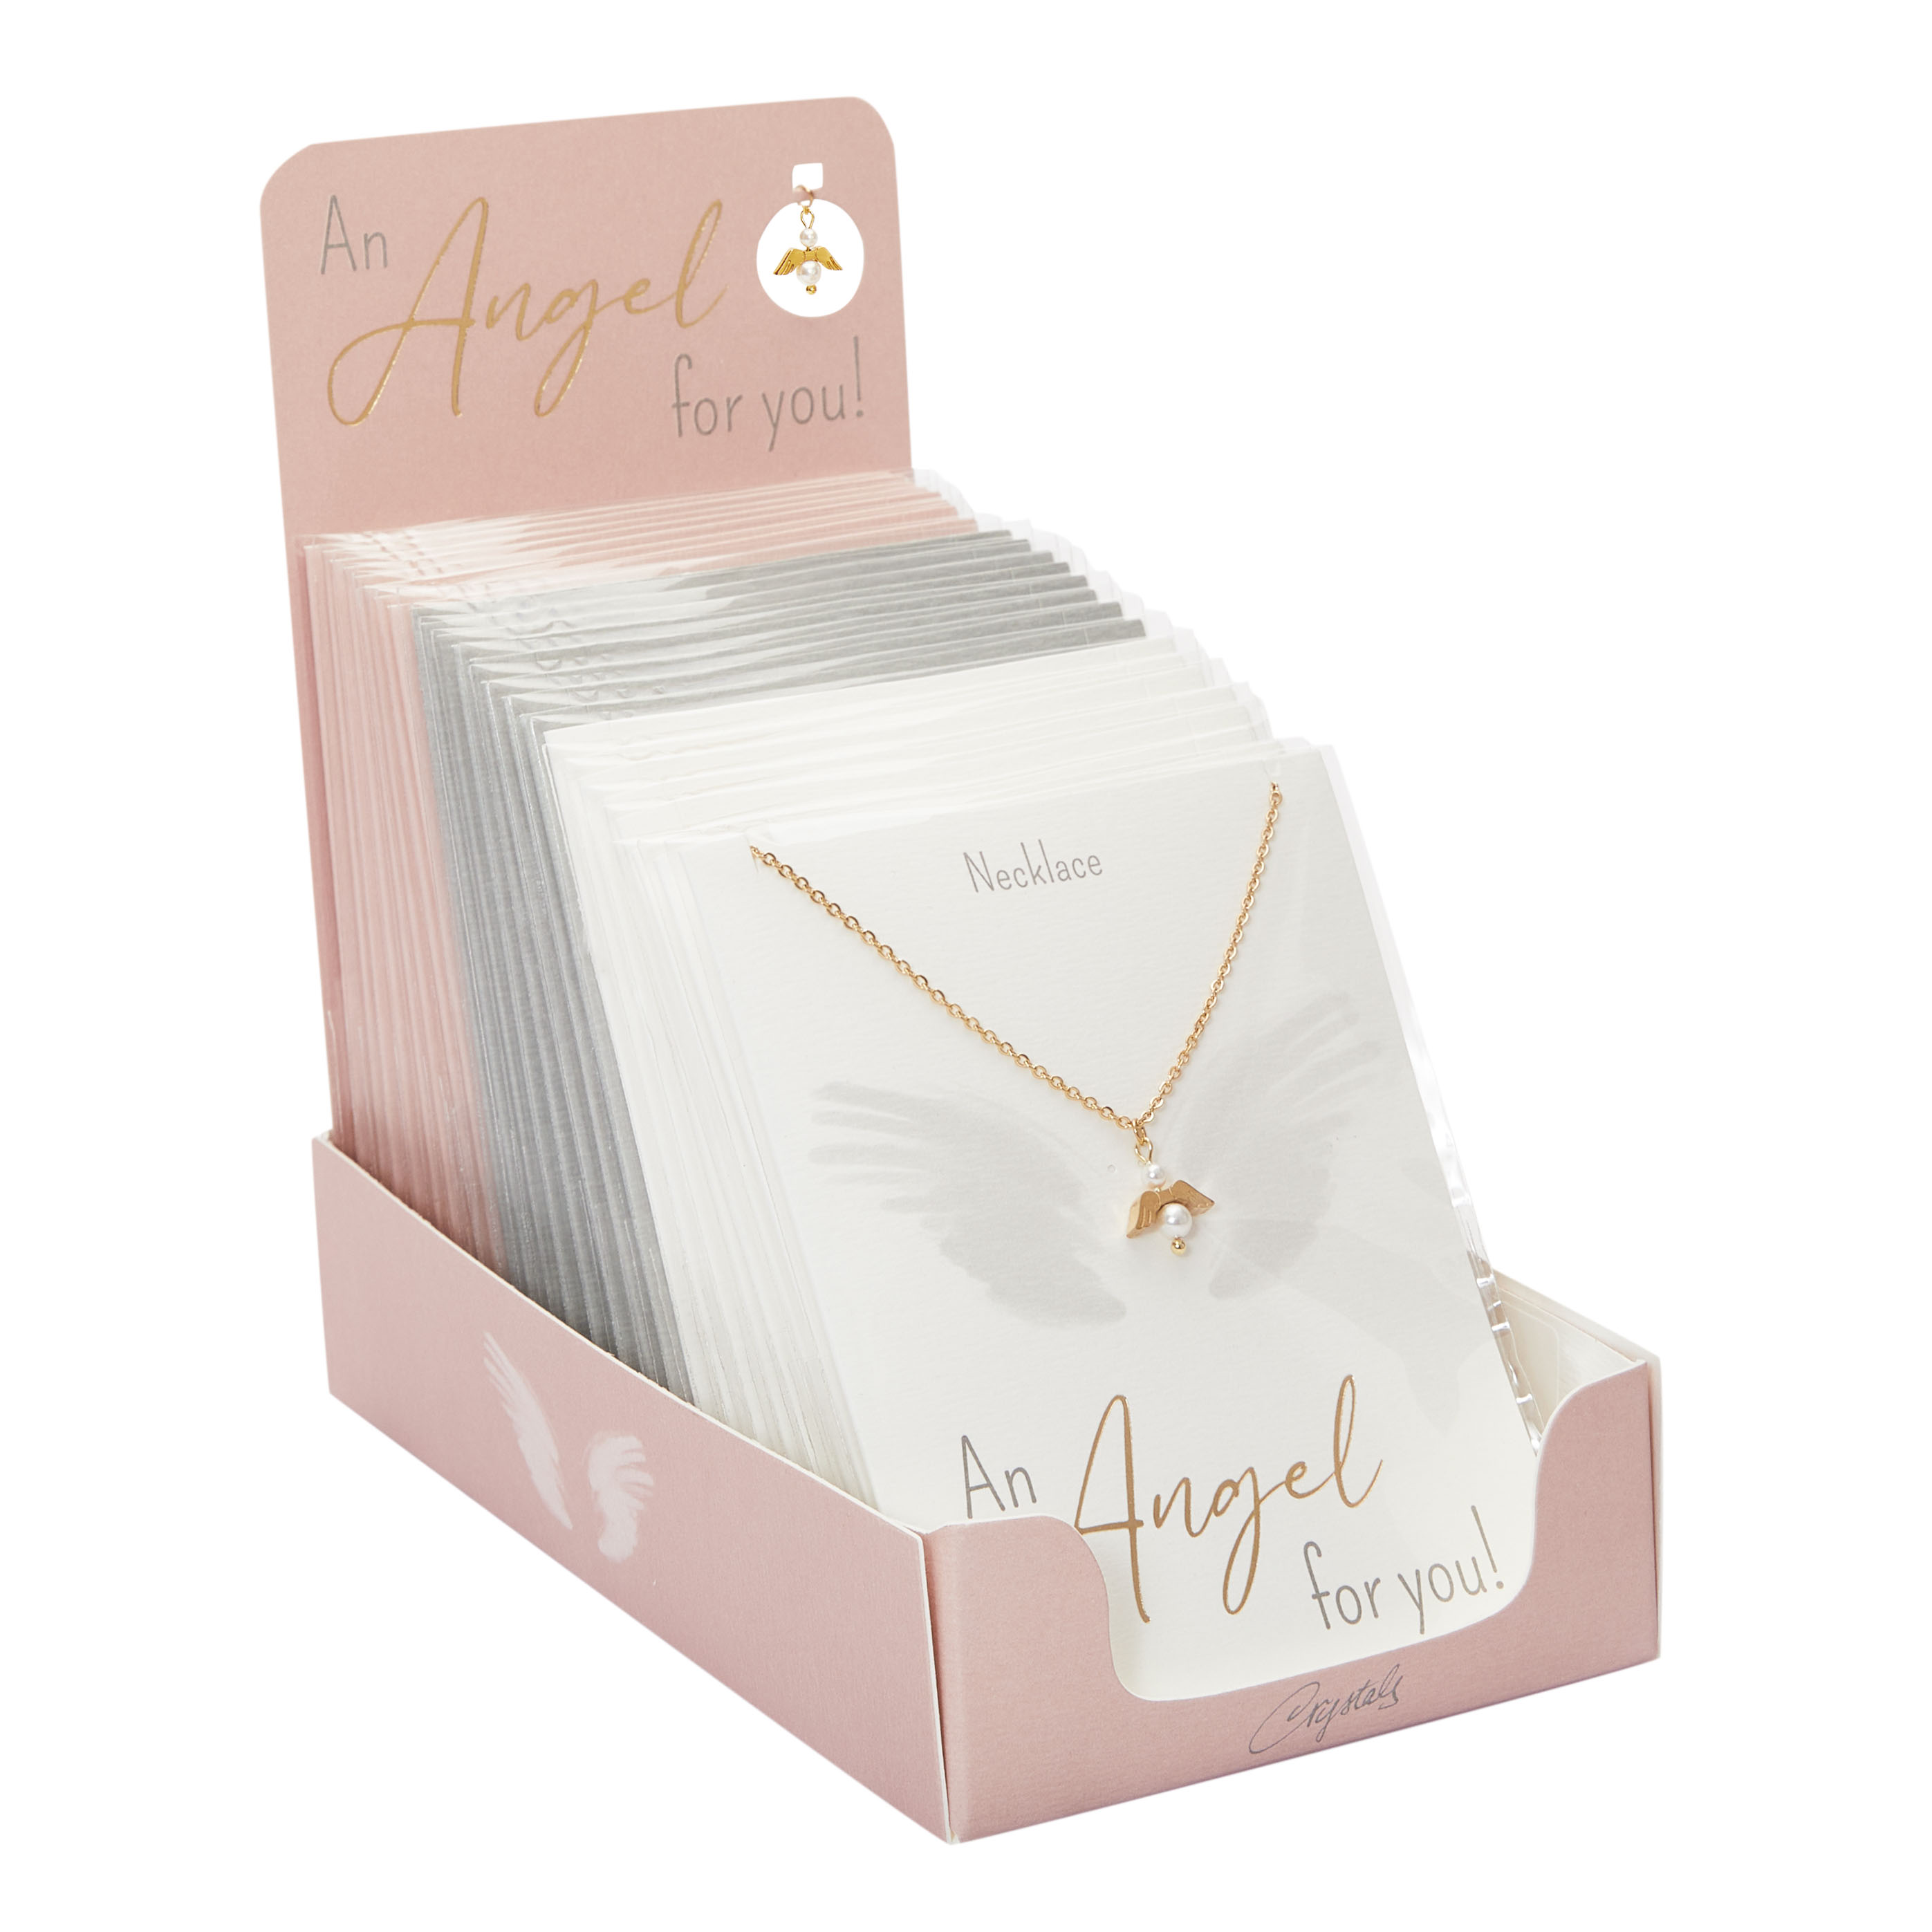 Display  Halsketten "An Angel for you"